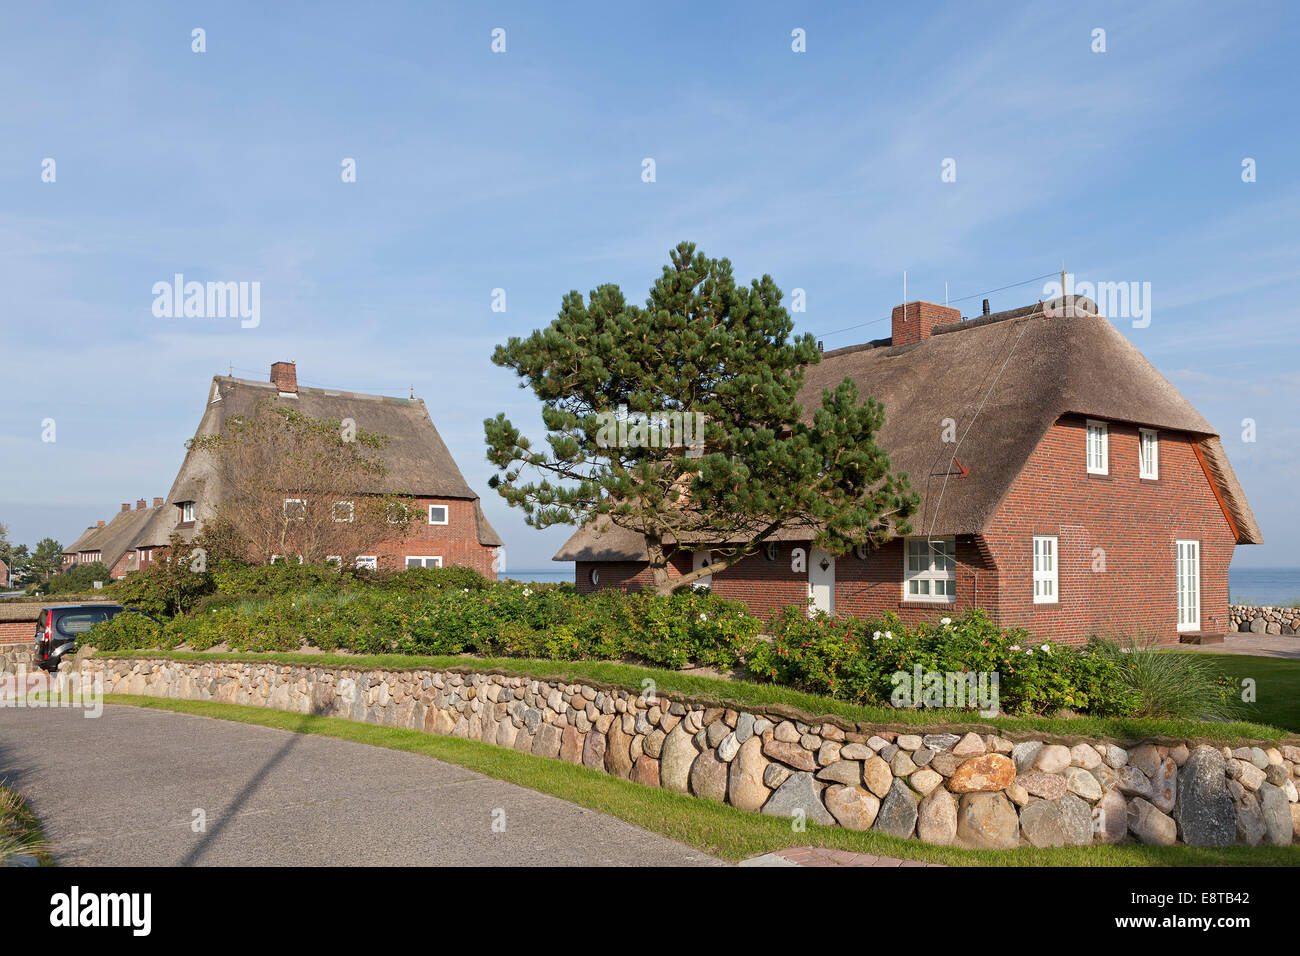 thatched houses, List, Sylt Island, Schleswig-Holstein, Germany Stock Photo